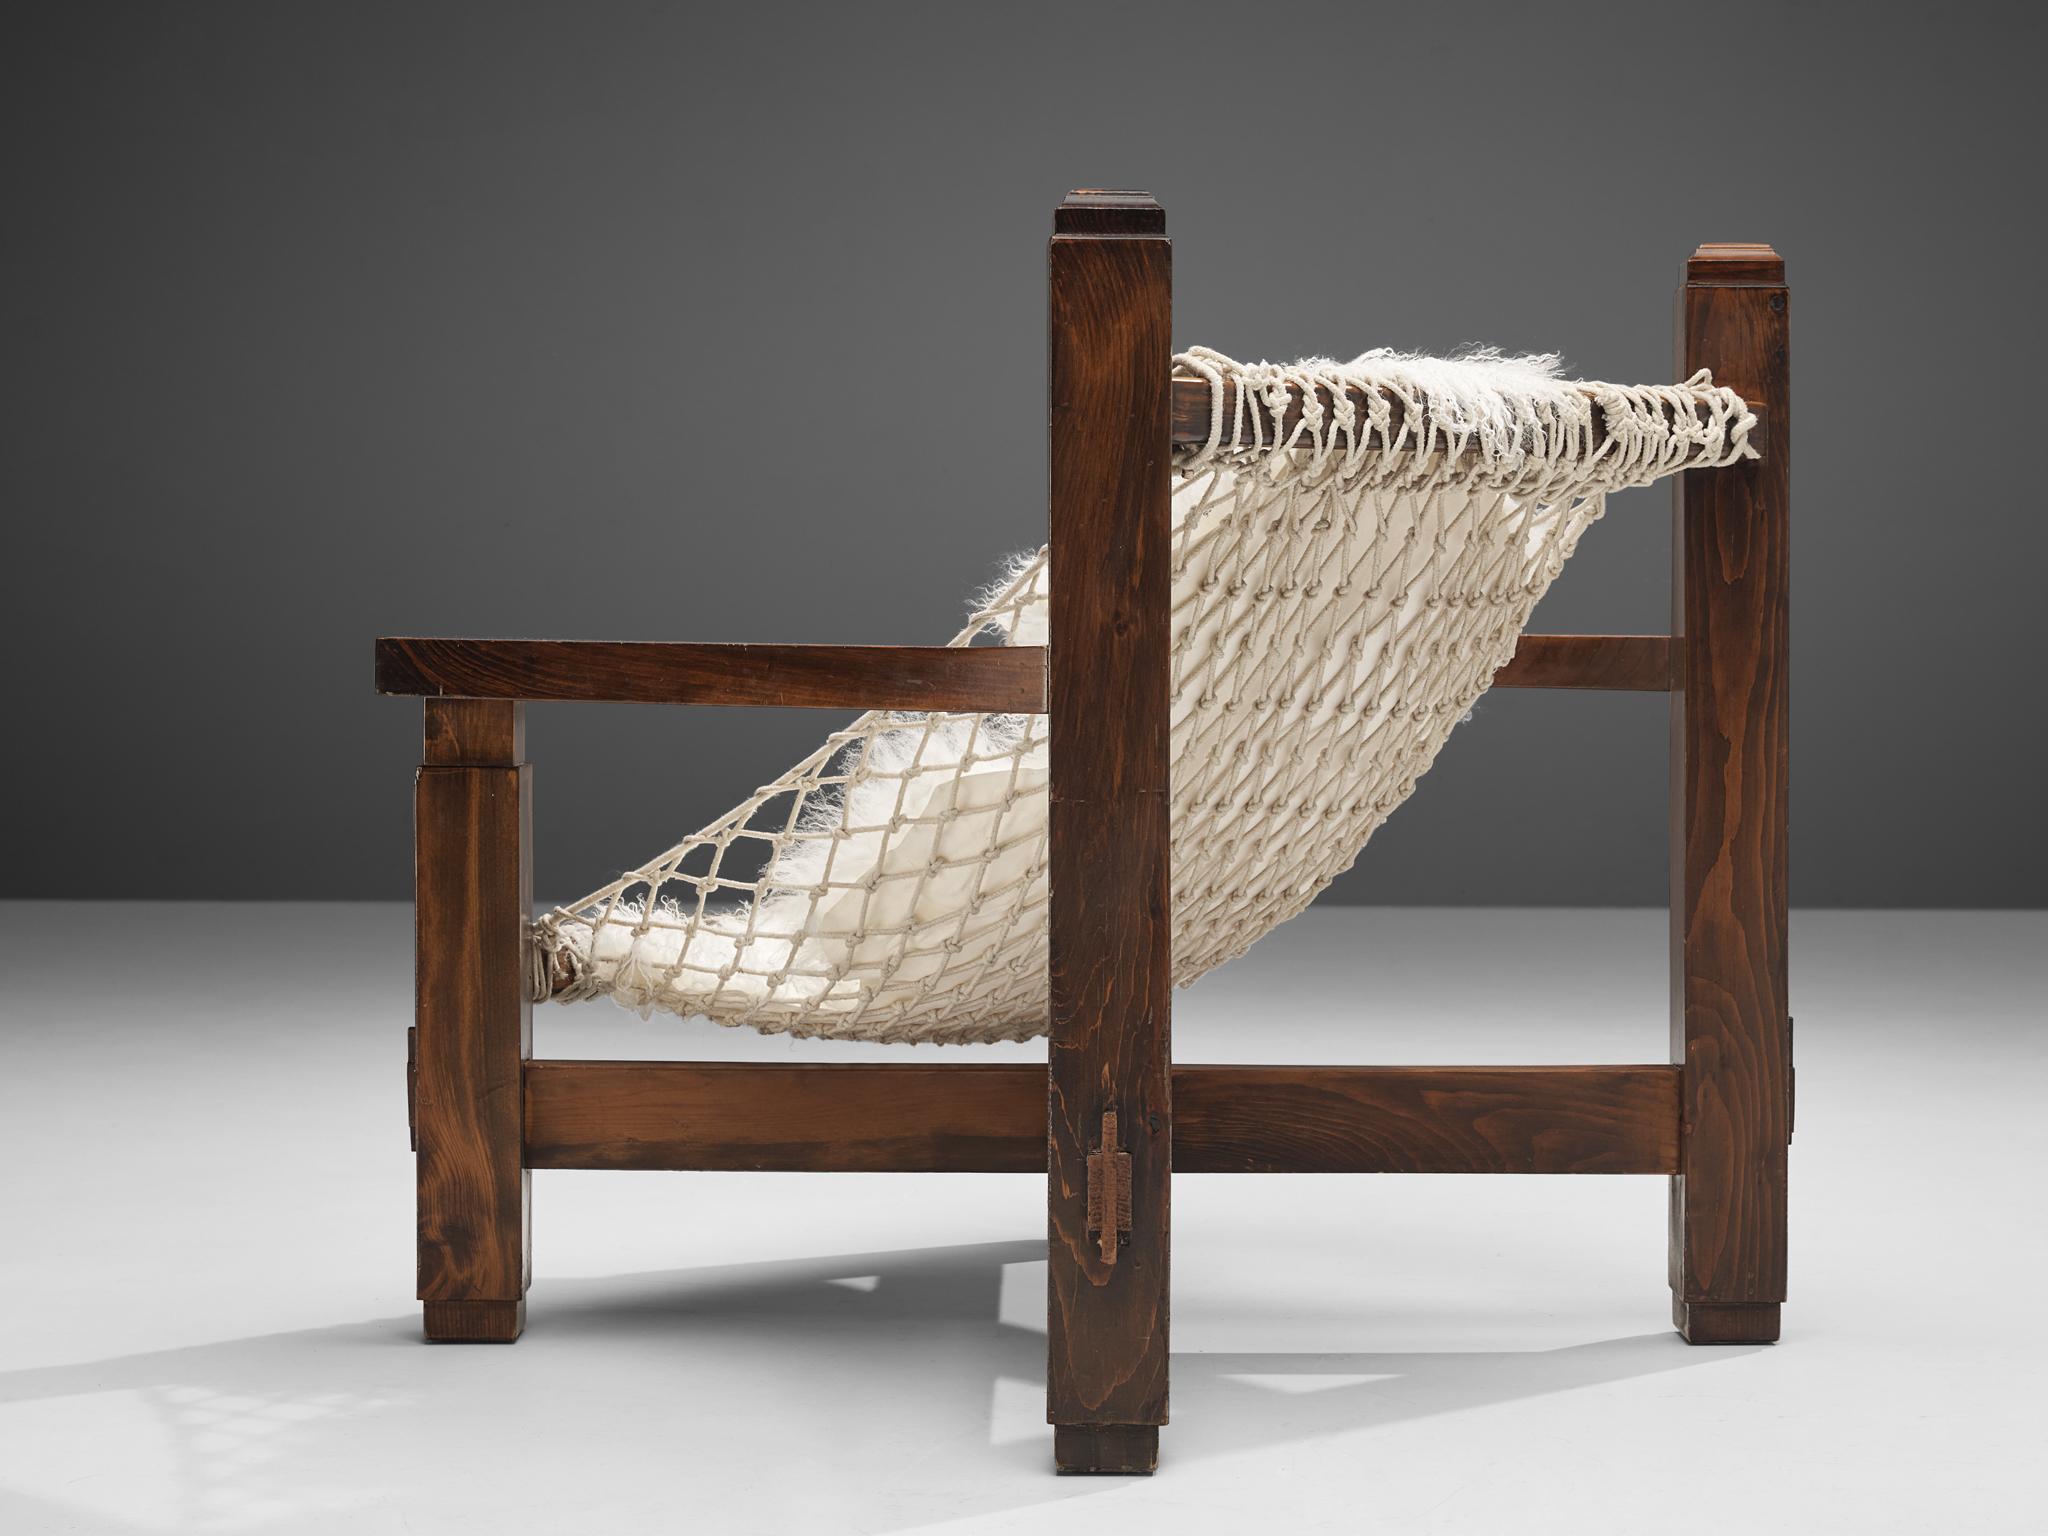 Lounge chair, stained pine, rope, Italy, 1970s

The designer of this Italian lounge chair truly wanted to impress the viewer with a monumental, volumetric design. The wide frame in stained pine features wonderful lines. Par example, the decorative